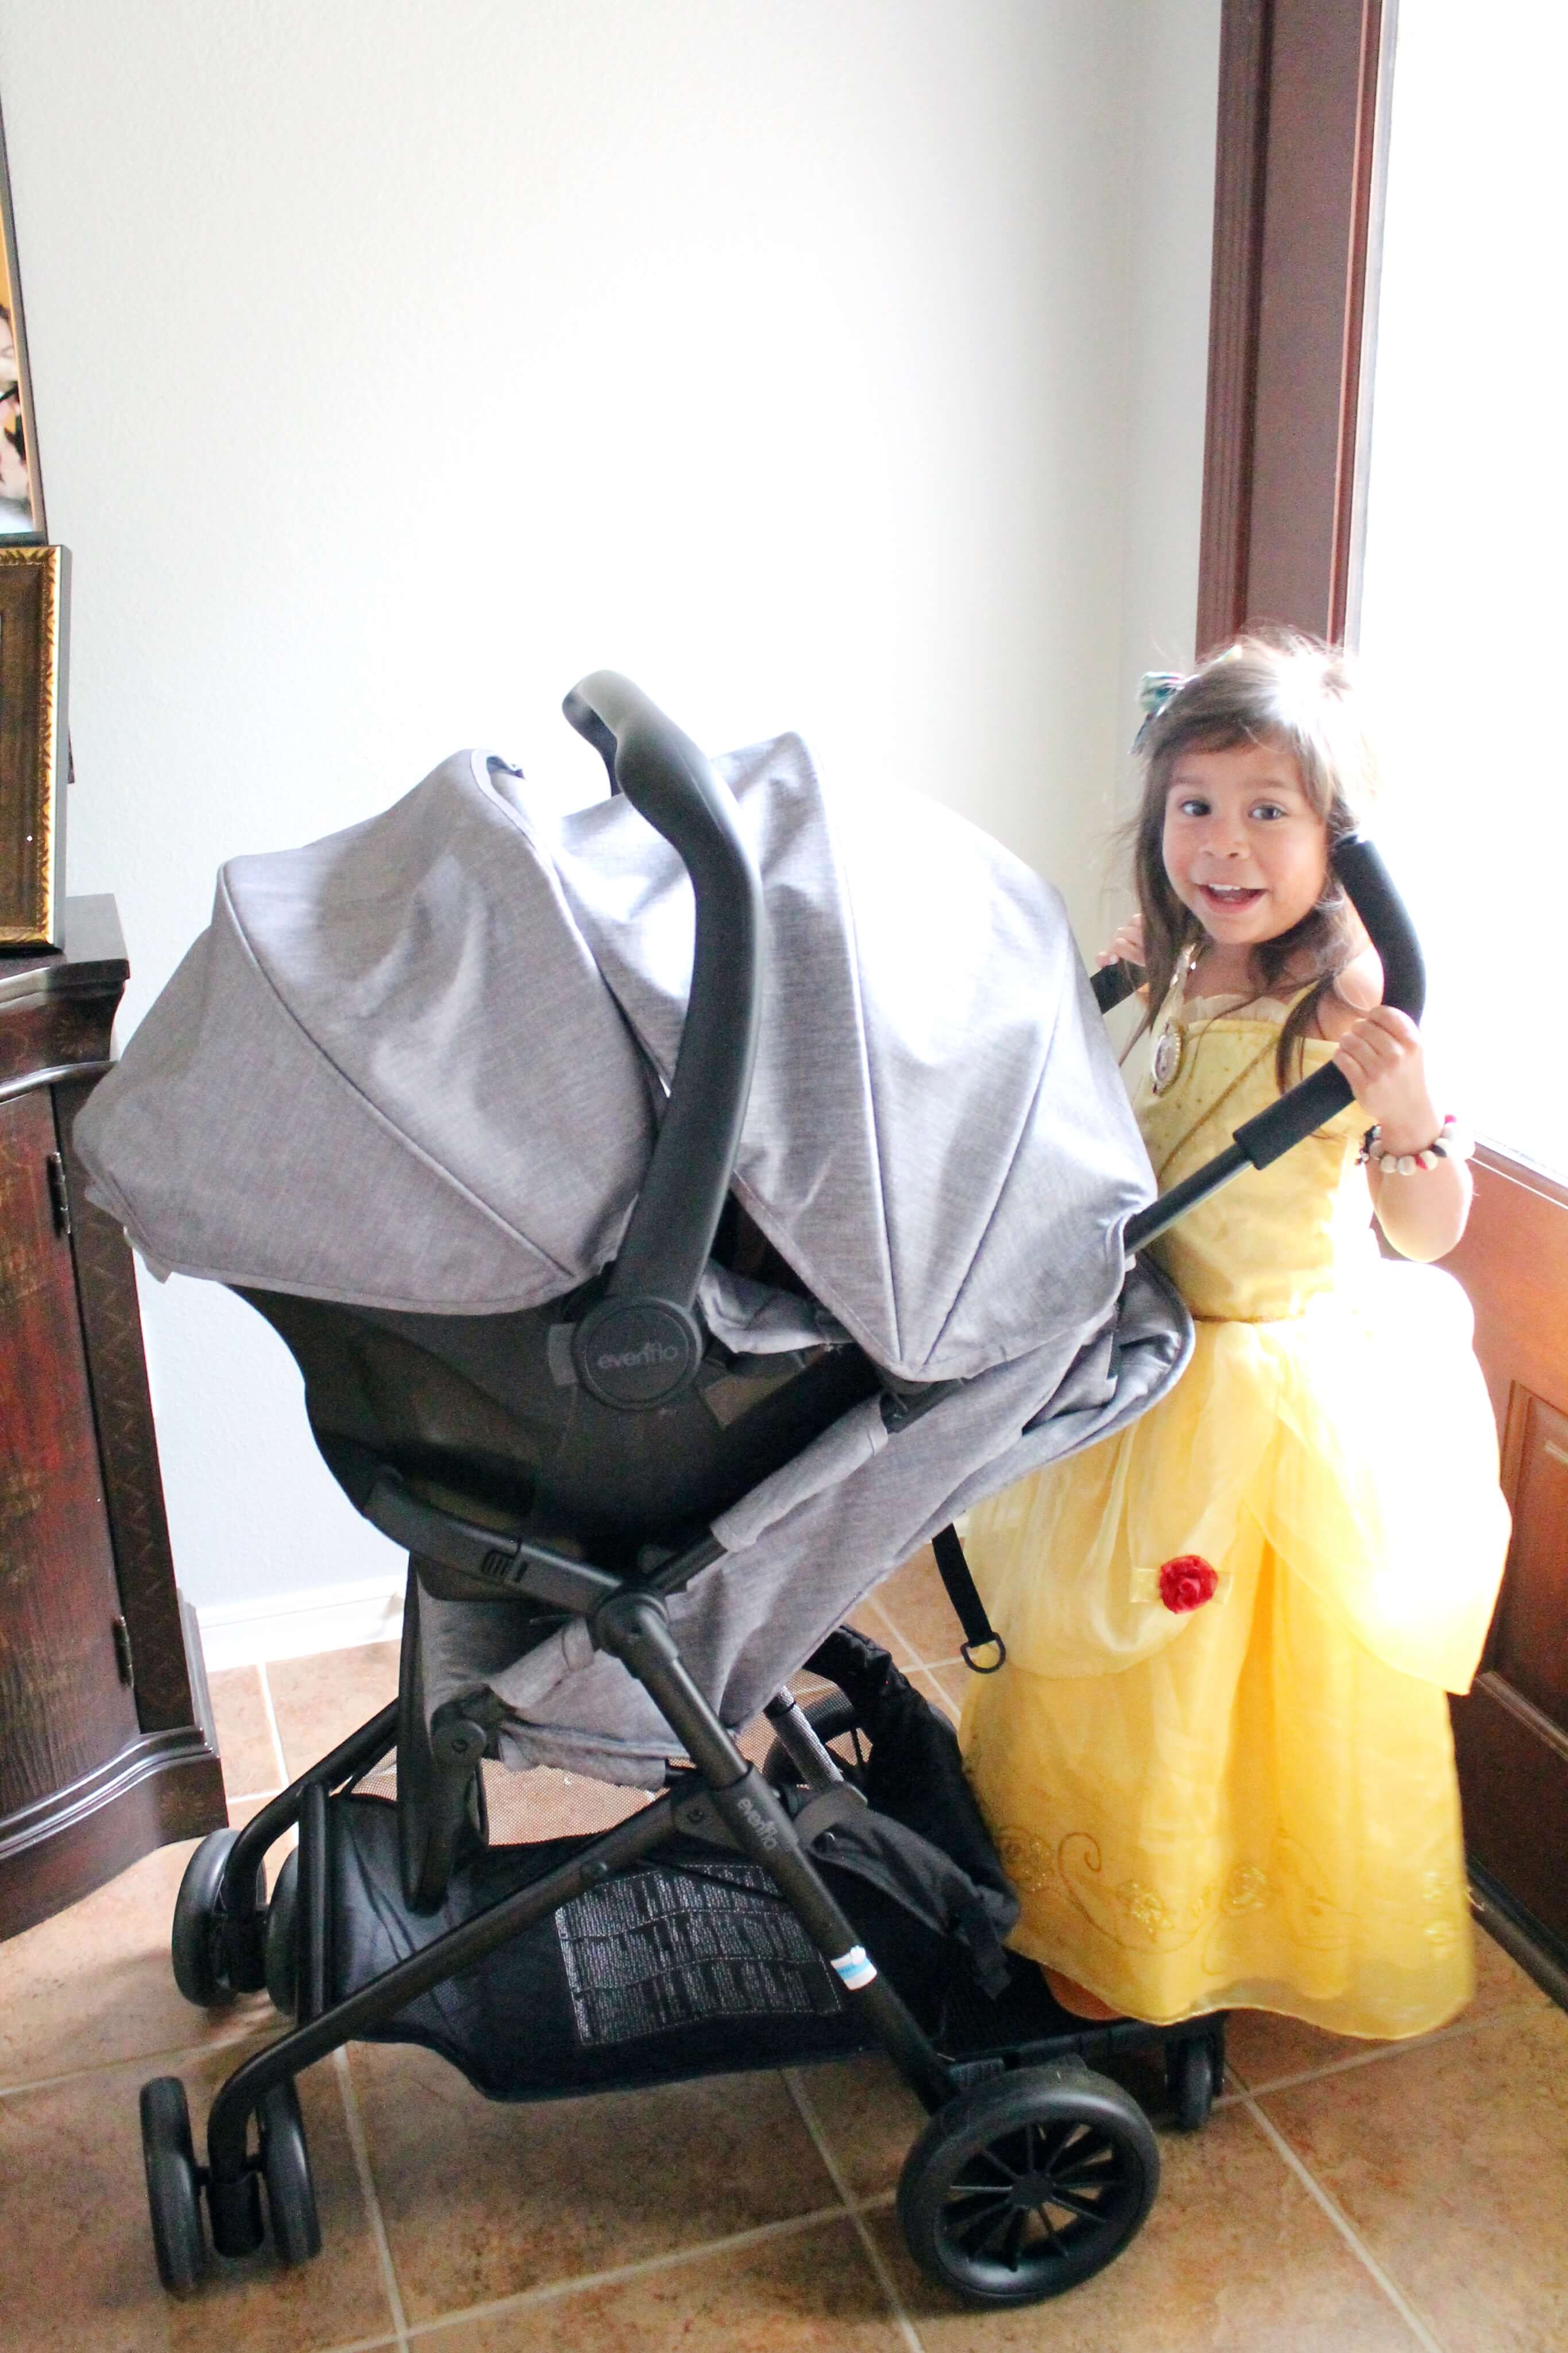 sibby travel system reviews